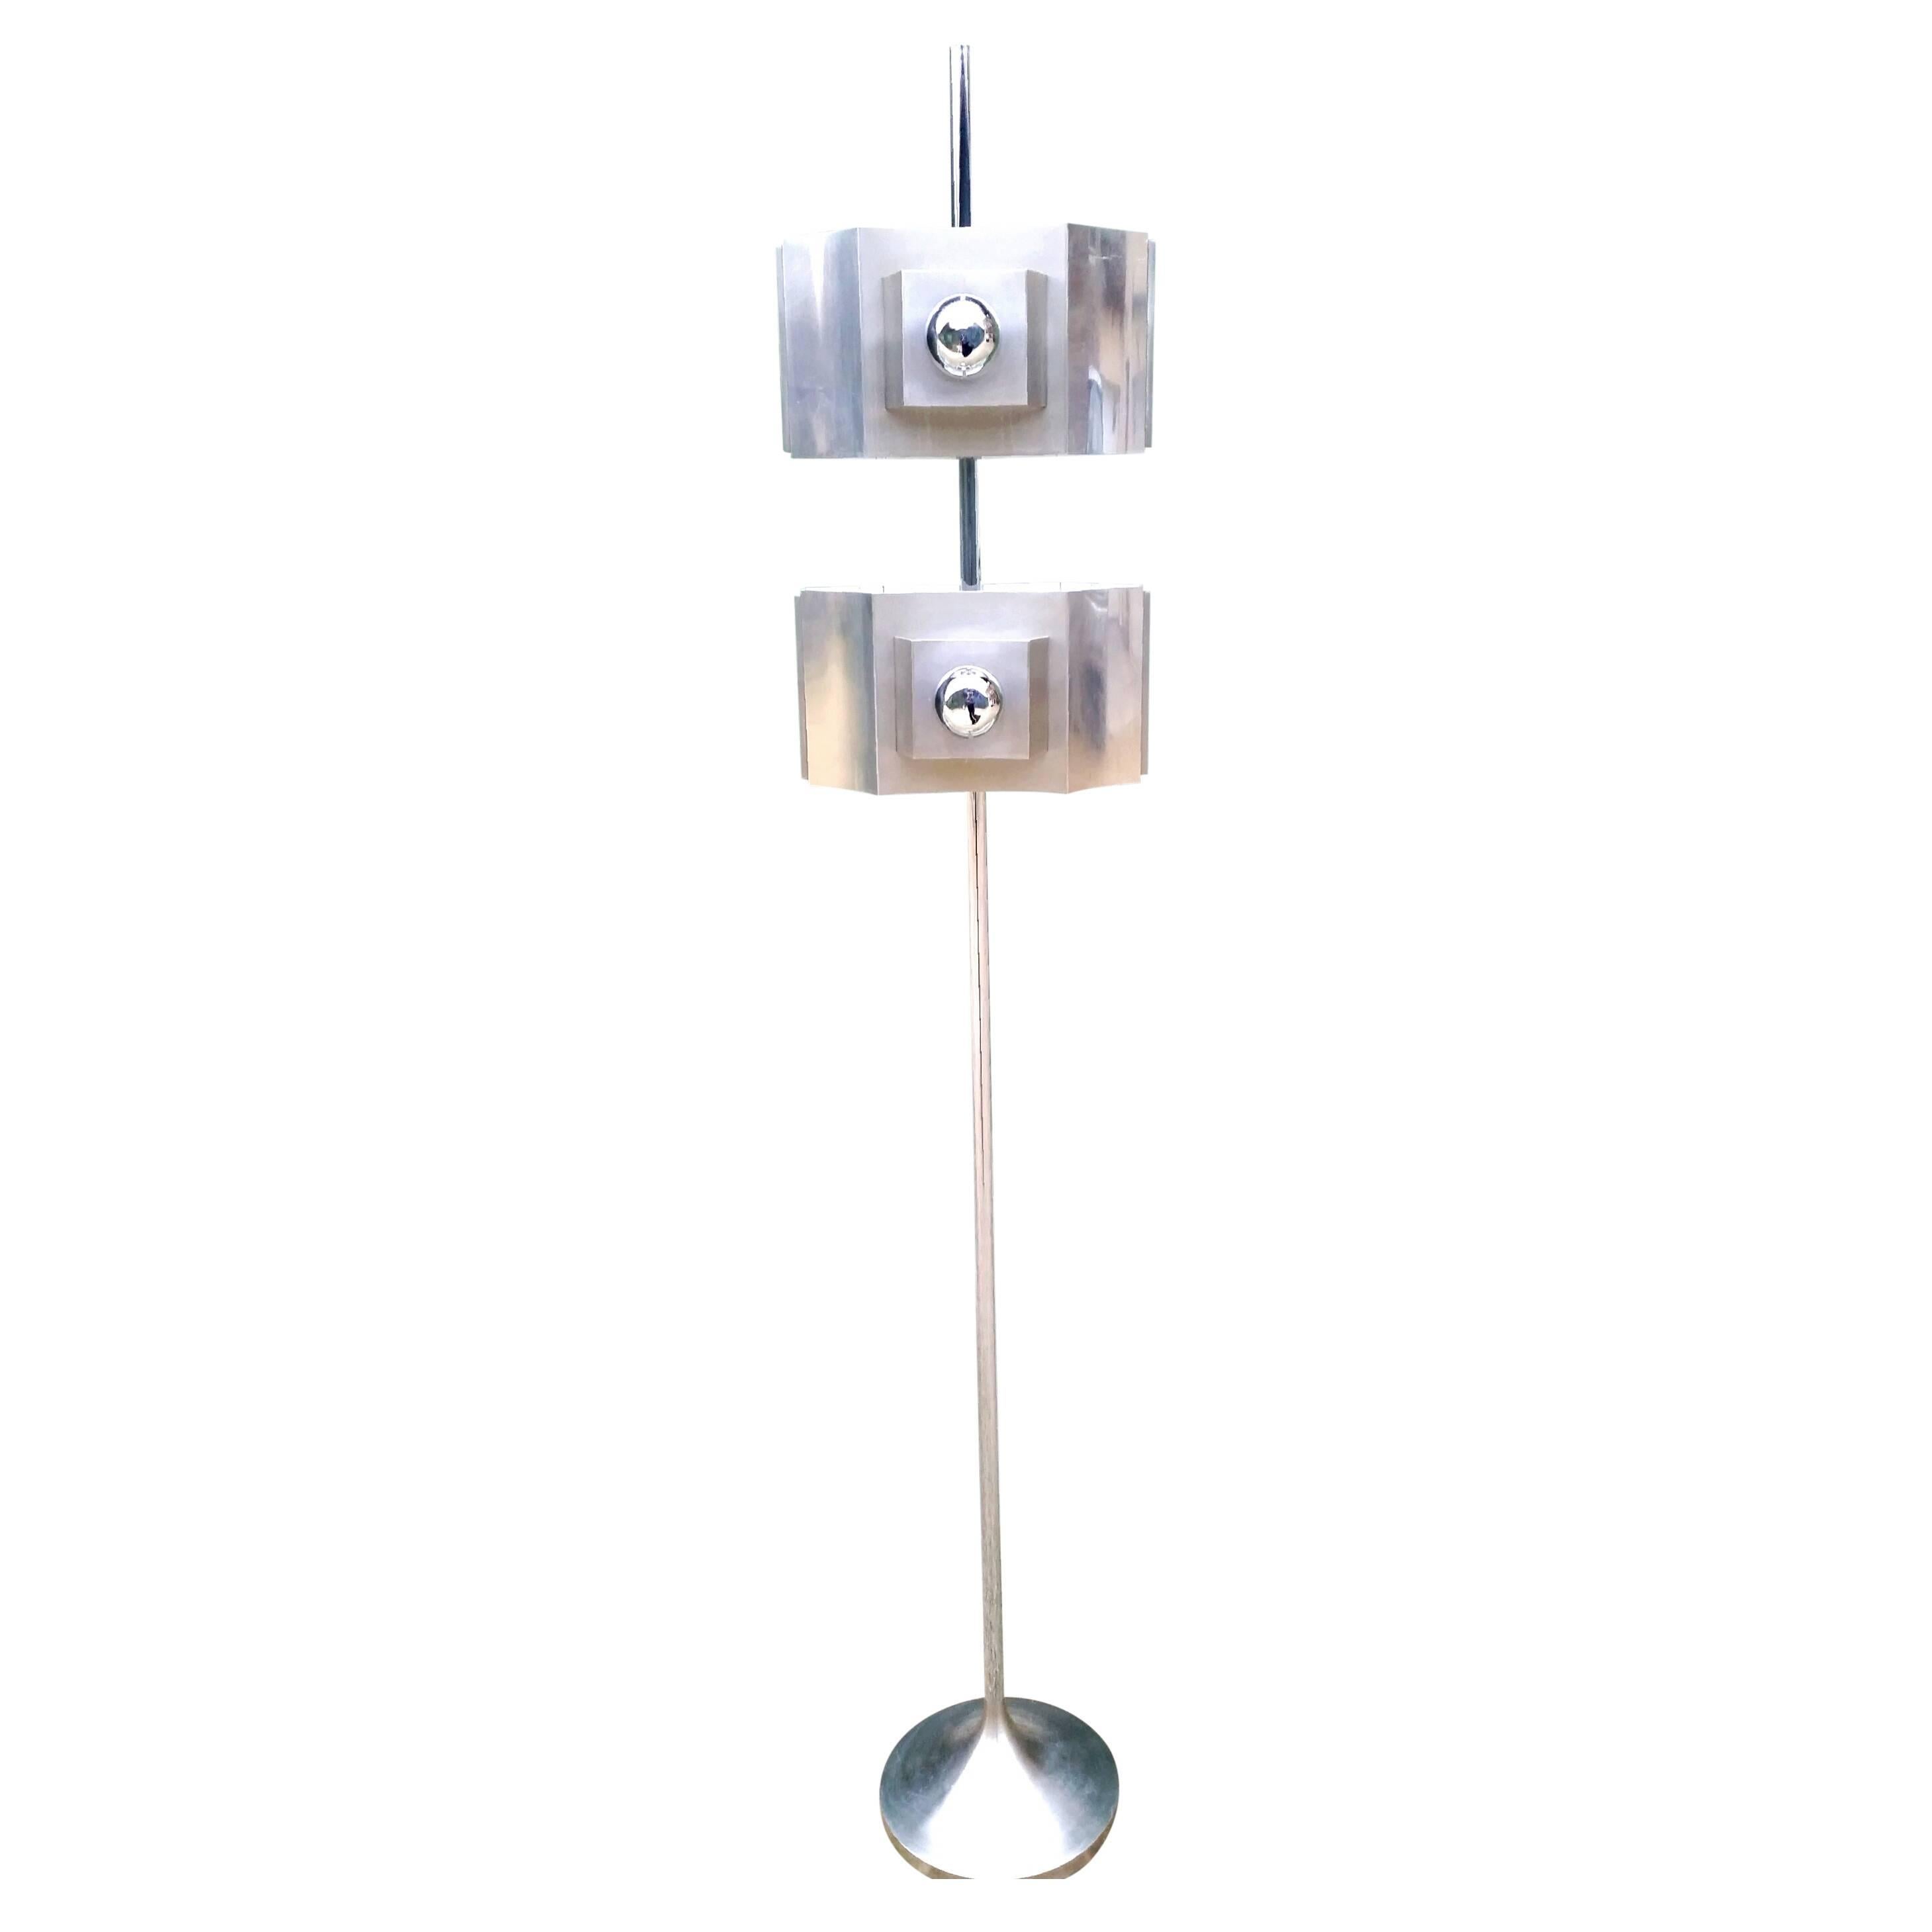 Rare Chrome Floor Lamp with a Tulip Shaped Base Attribued to Sciolari 1970s